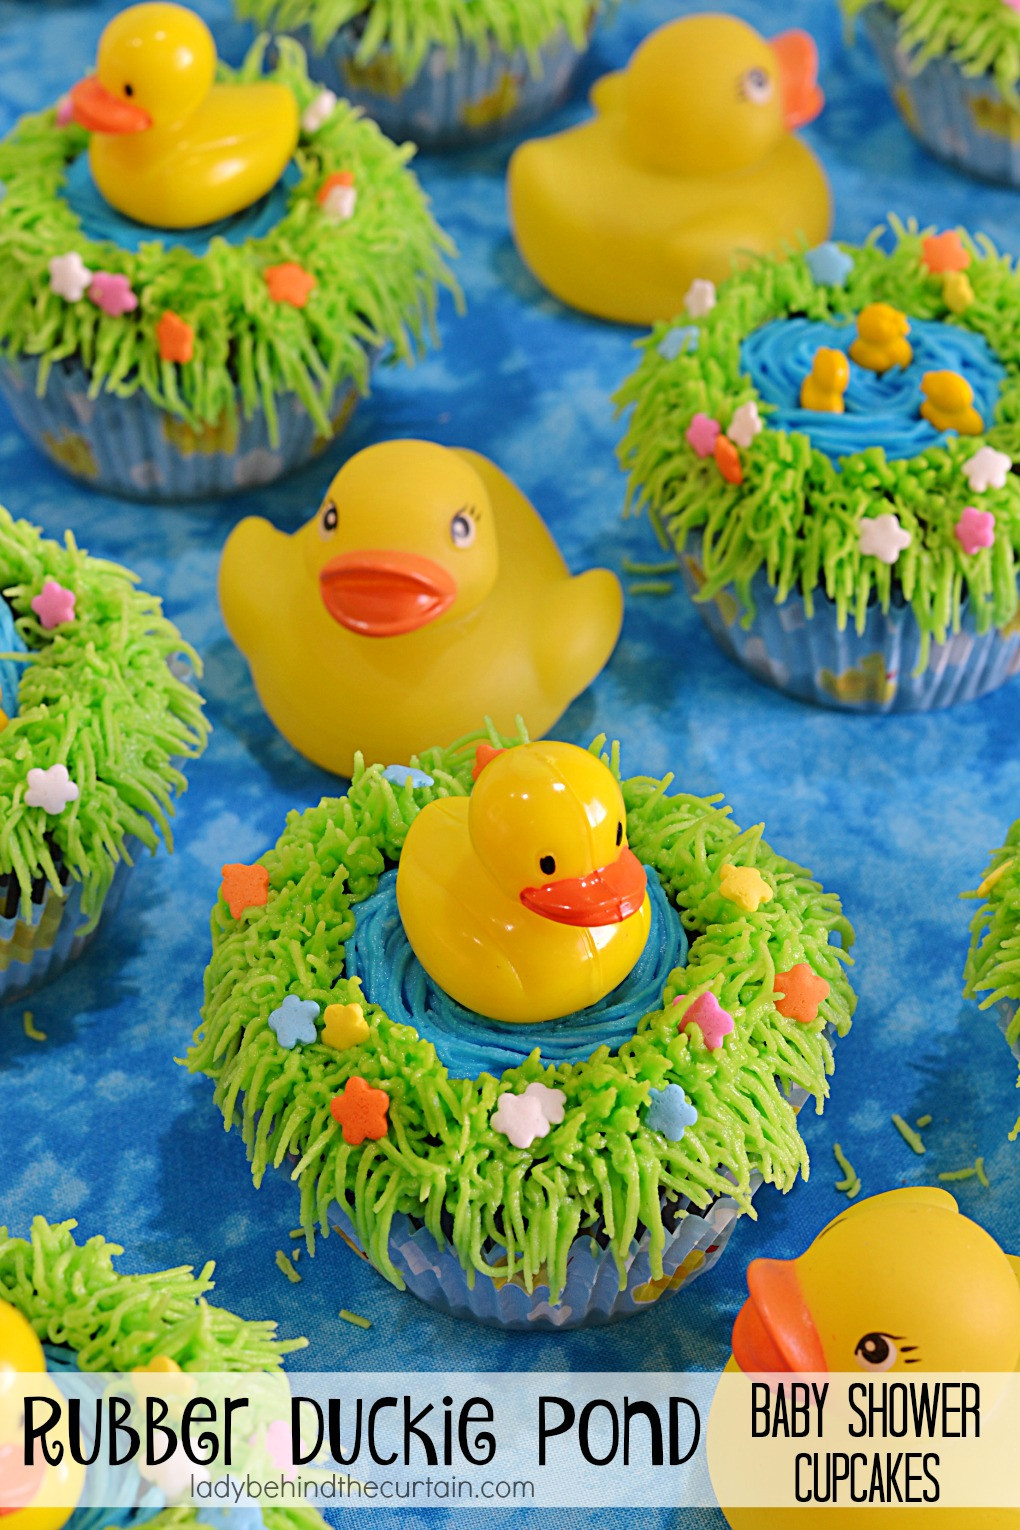 Rubber Duckie Cupcakes
 Rubber Duckie Pond Baby Shower Cupcakes